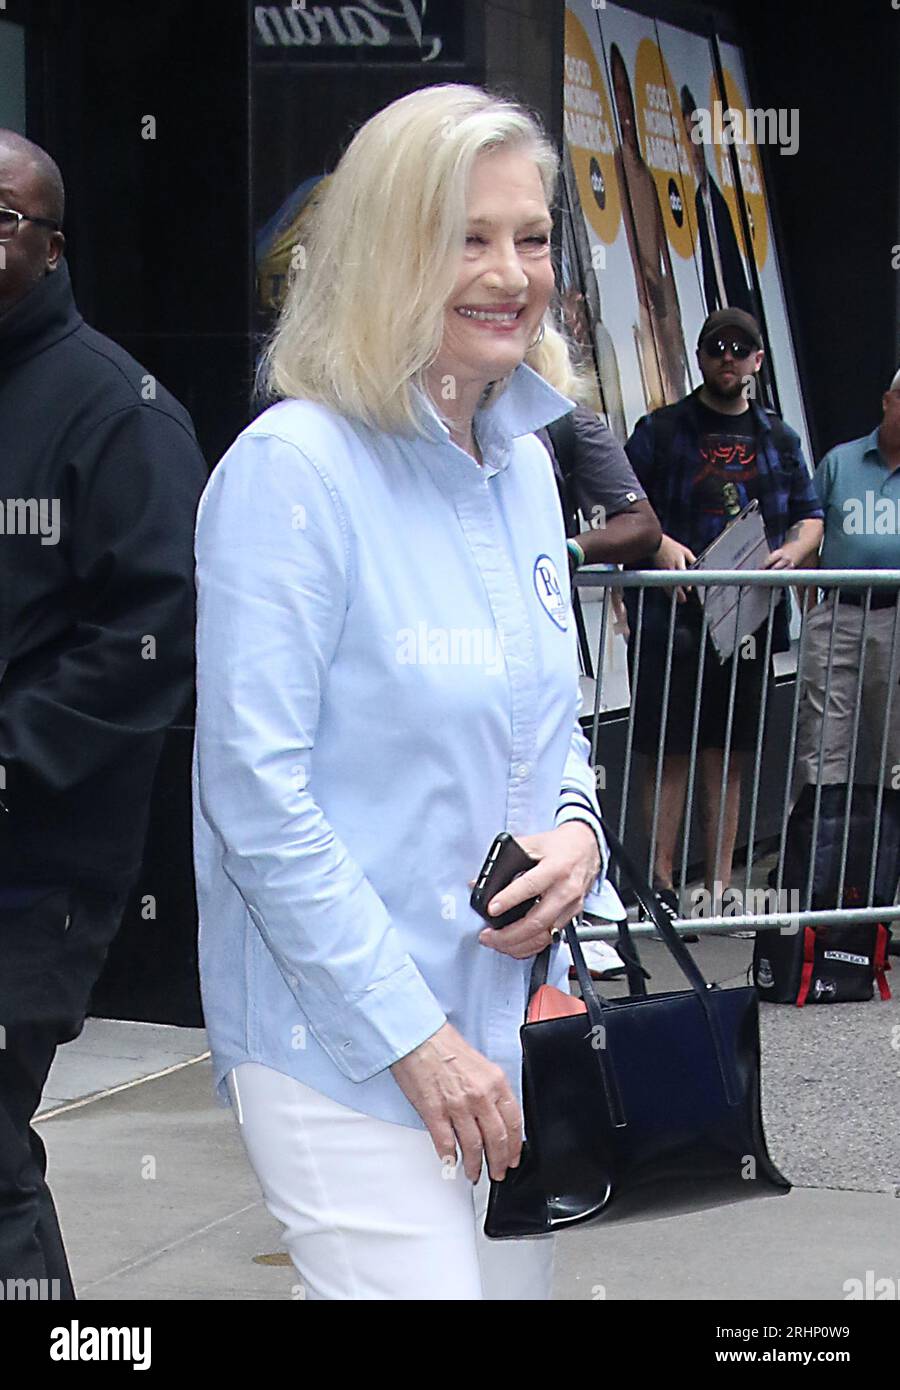 New York, NY, USA. 16th Aug, 2023. Diane Sawyer at the Good Morning America Bachelorette party for Robin Roberts and Amber Laign in New York City on August 16, 2023. Credit: Rw/Media Punch/Alamy Live News Stock Photo